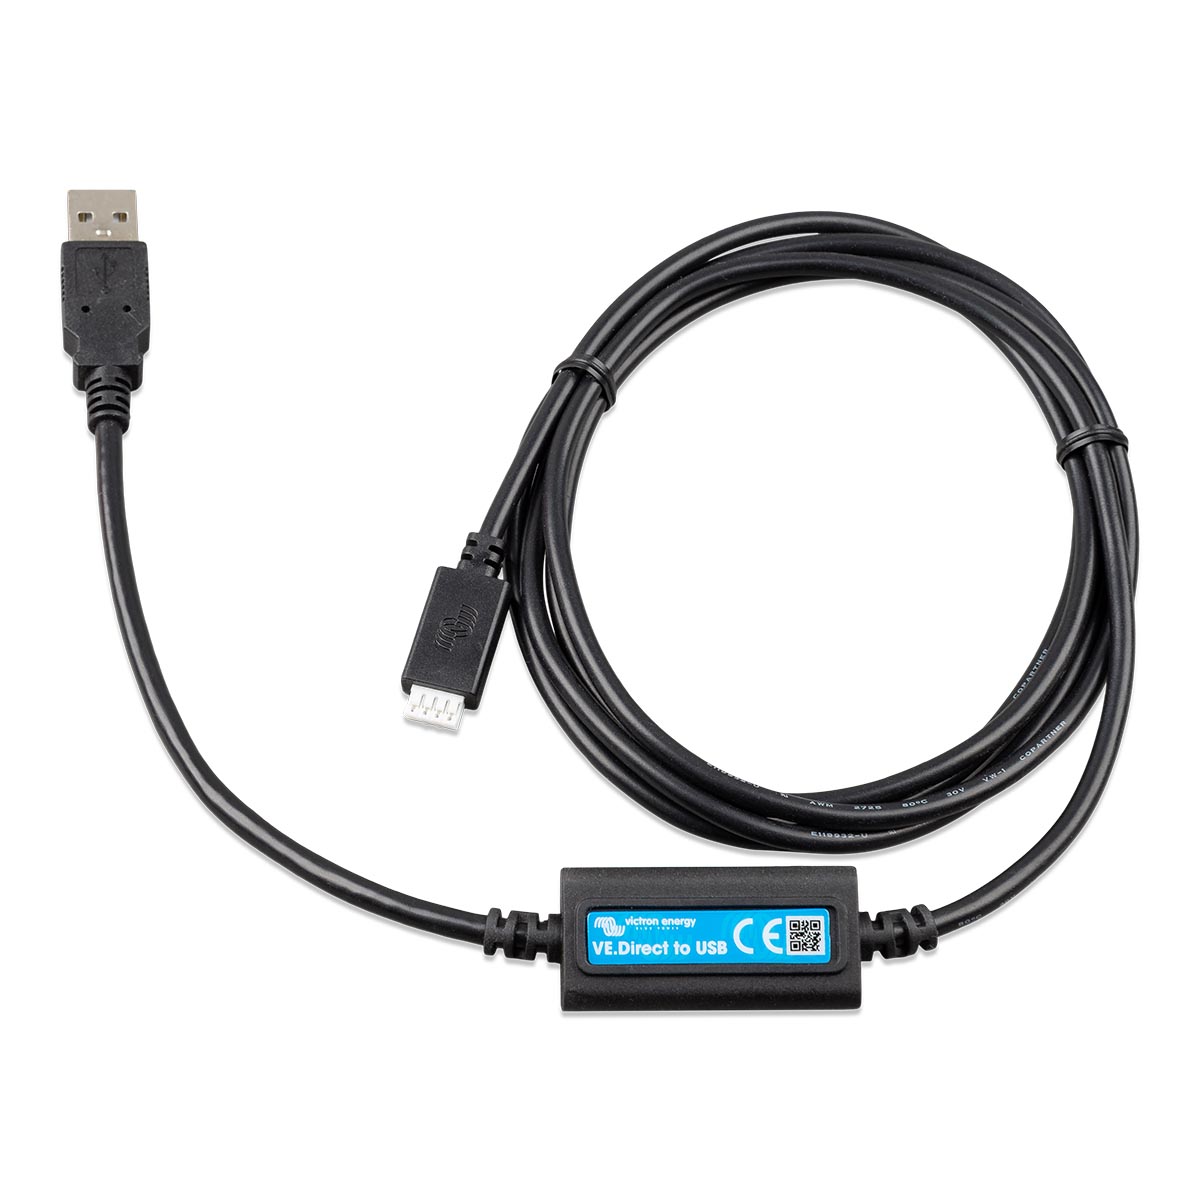 Victron VE.Direct to USB interface (USt-befreit nach §12 Abs.3 Nr. 1 S.1 UStG)